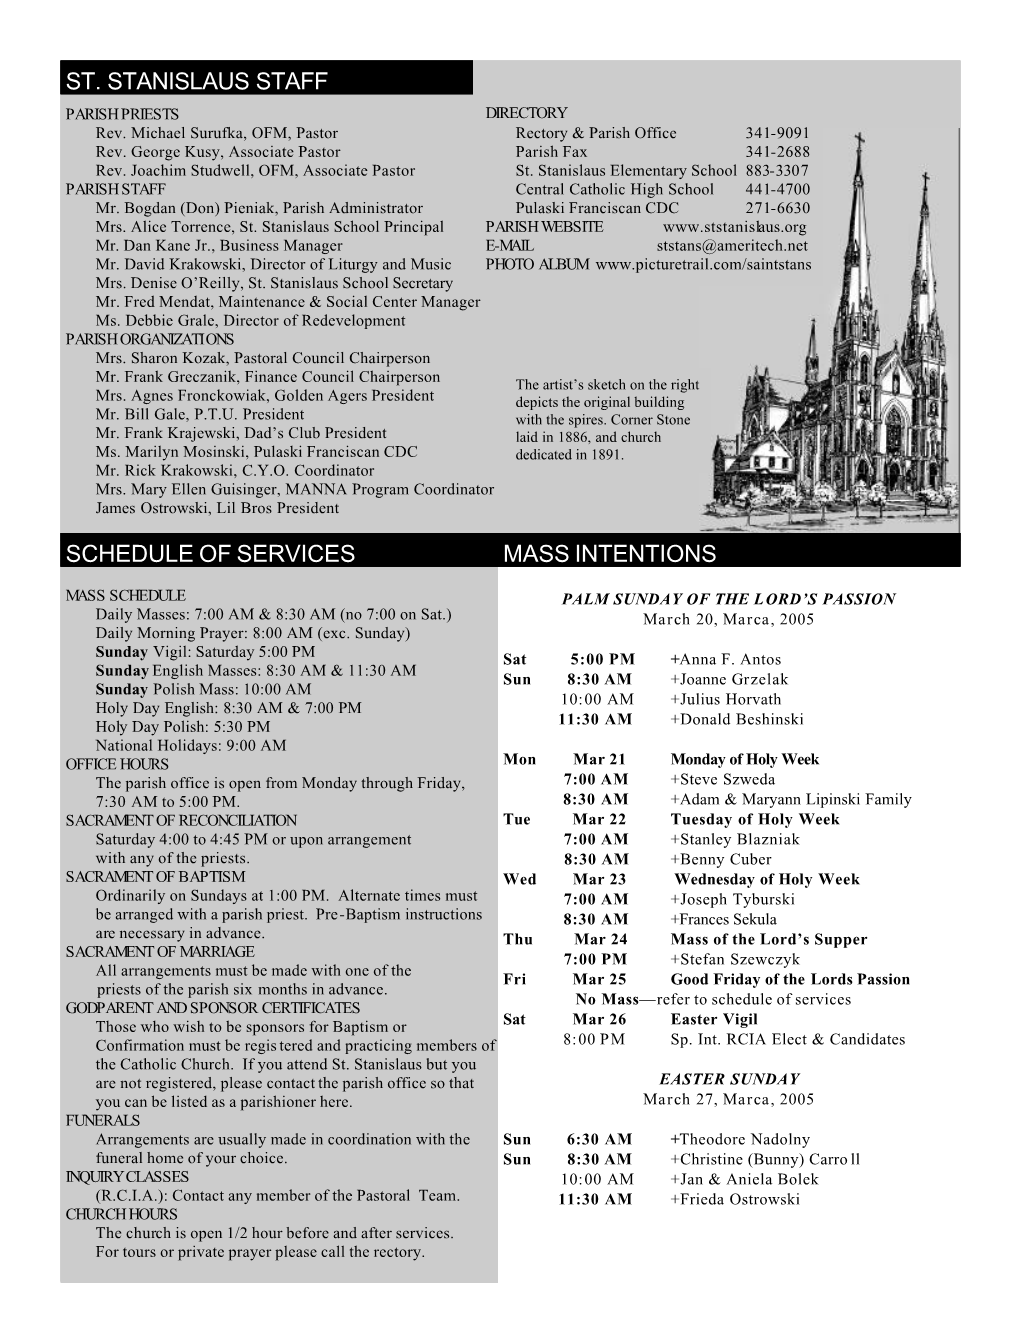 Schedule of Services Mass Intentions St. Stanislaus